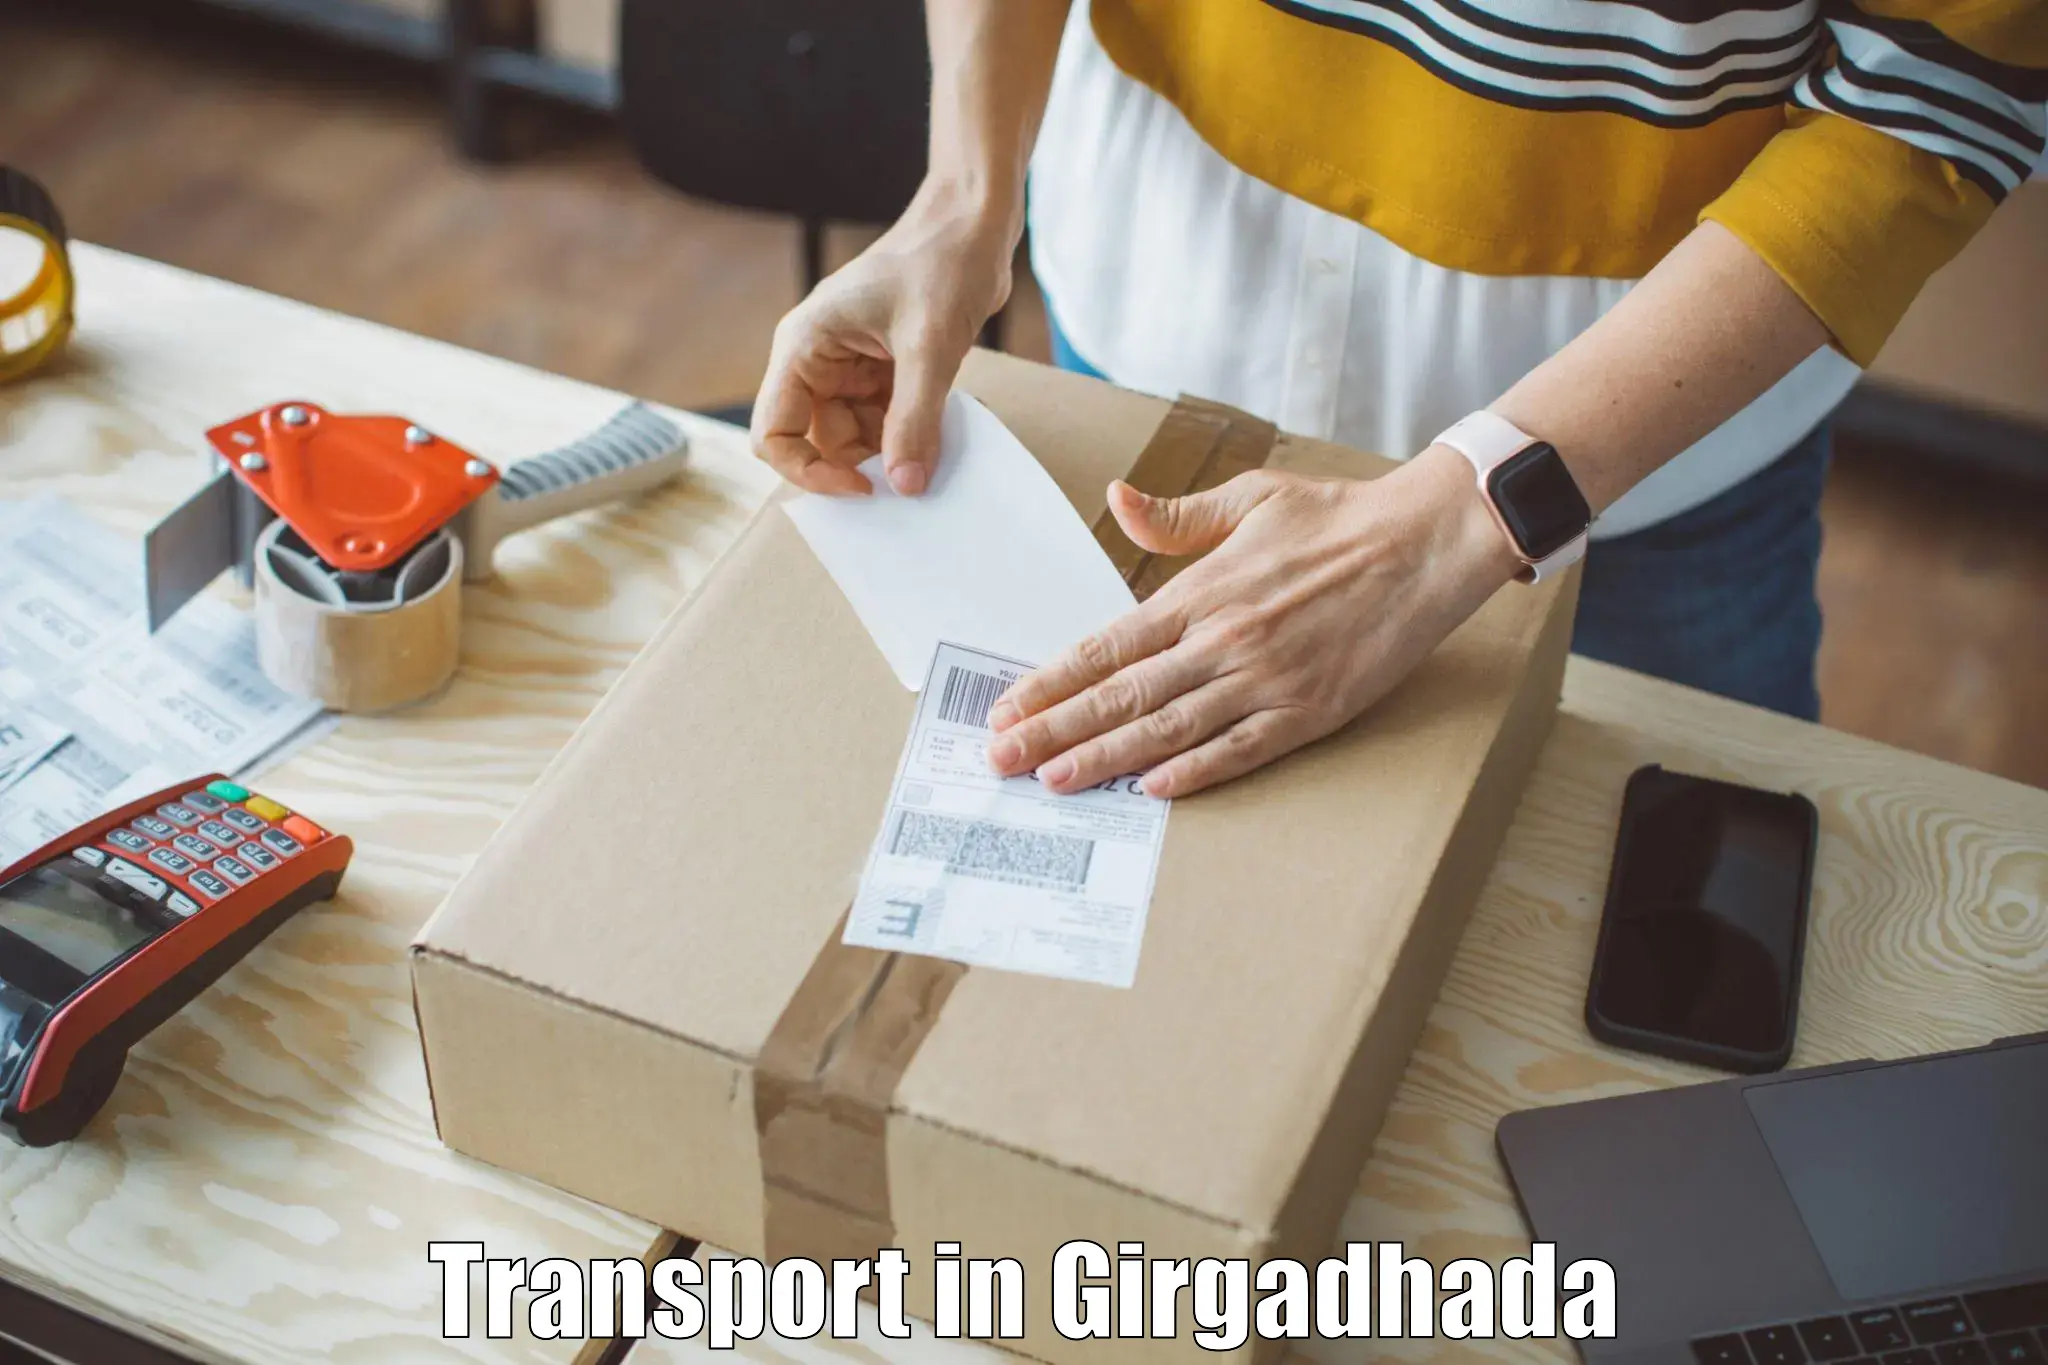 Goods delivery service in Girgadhada